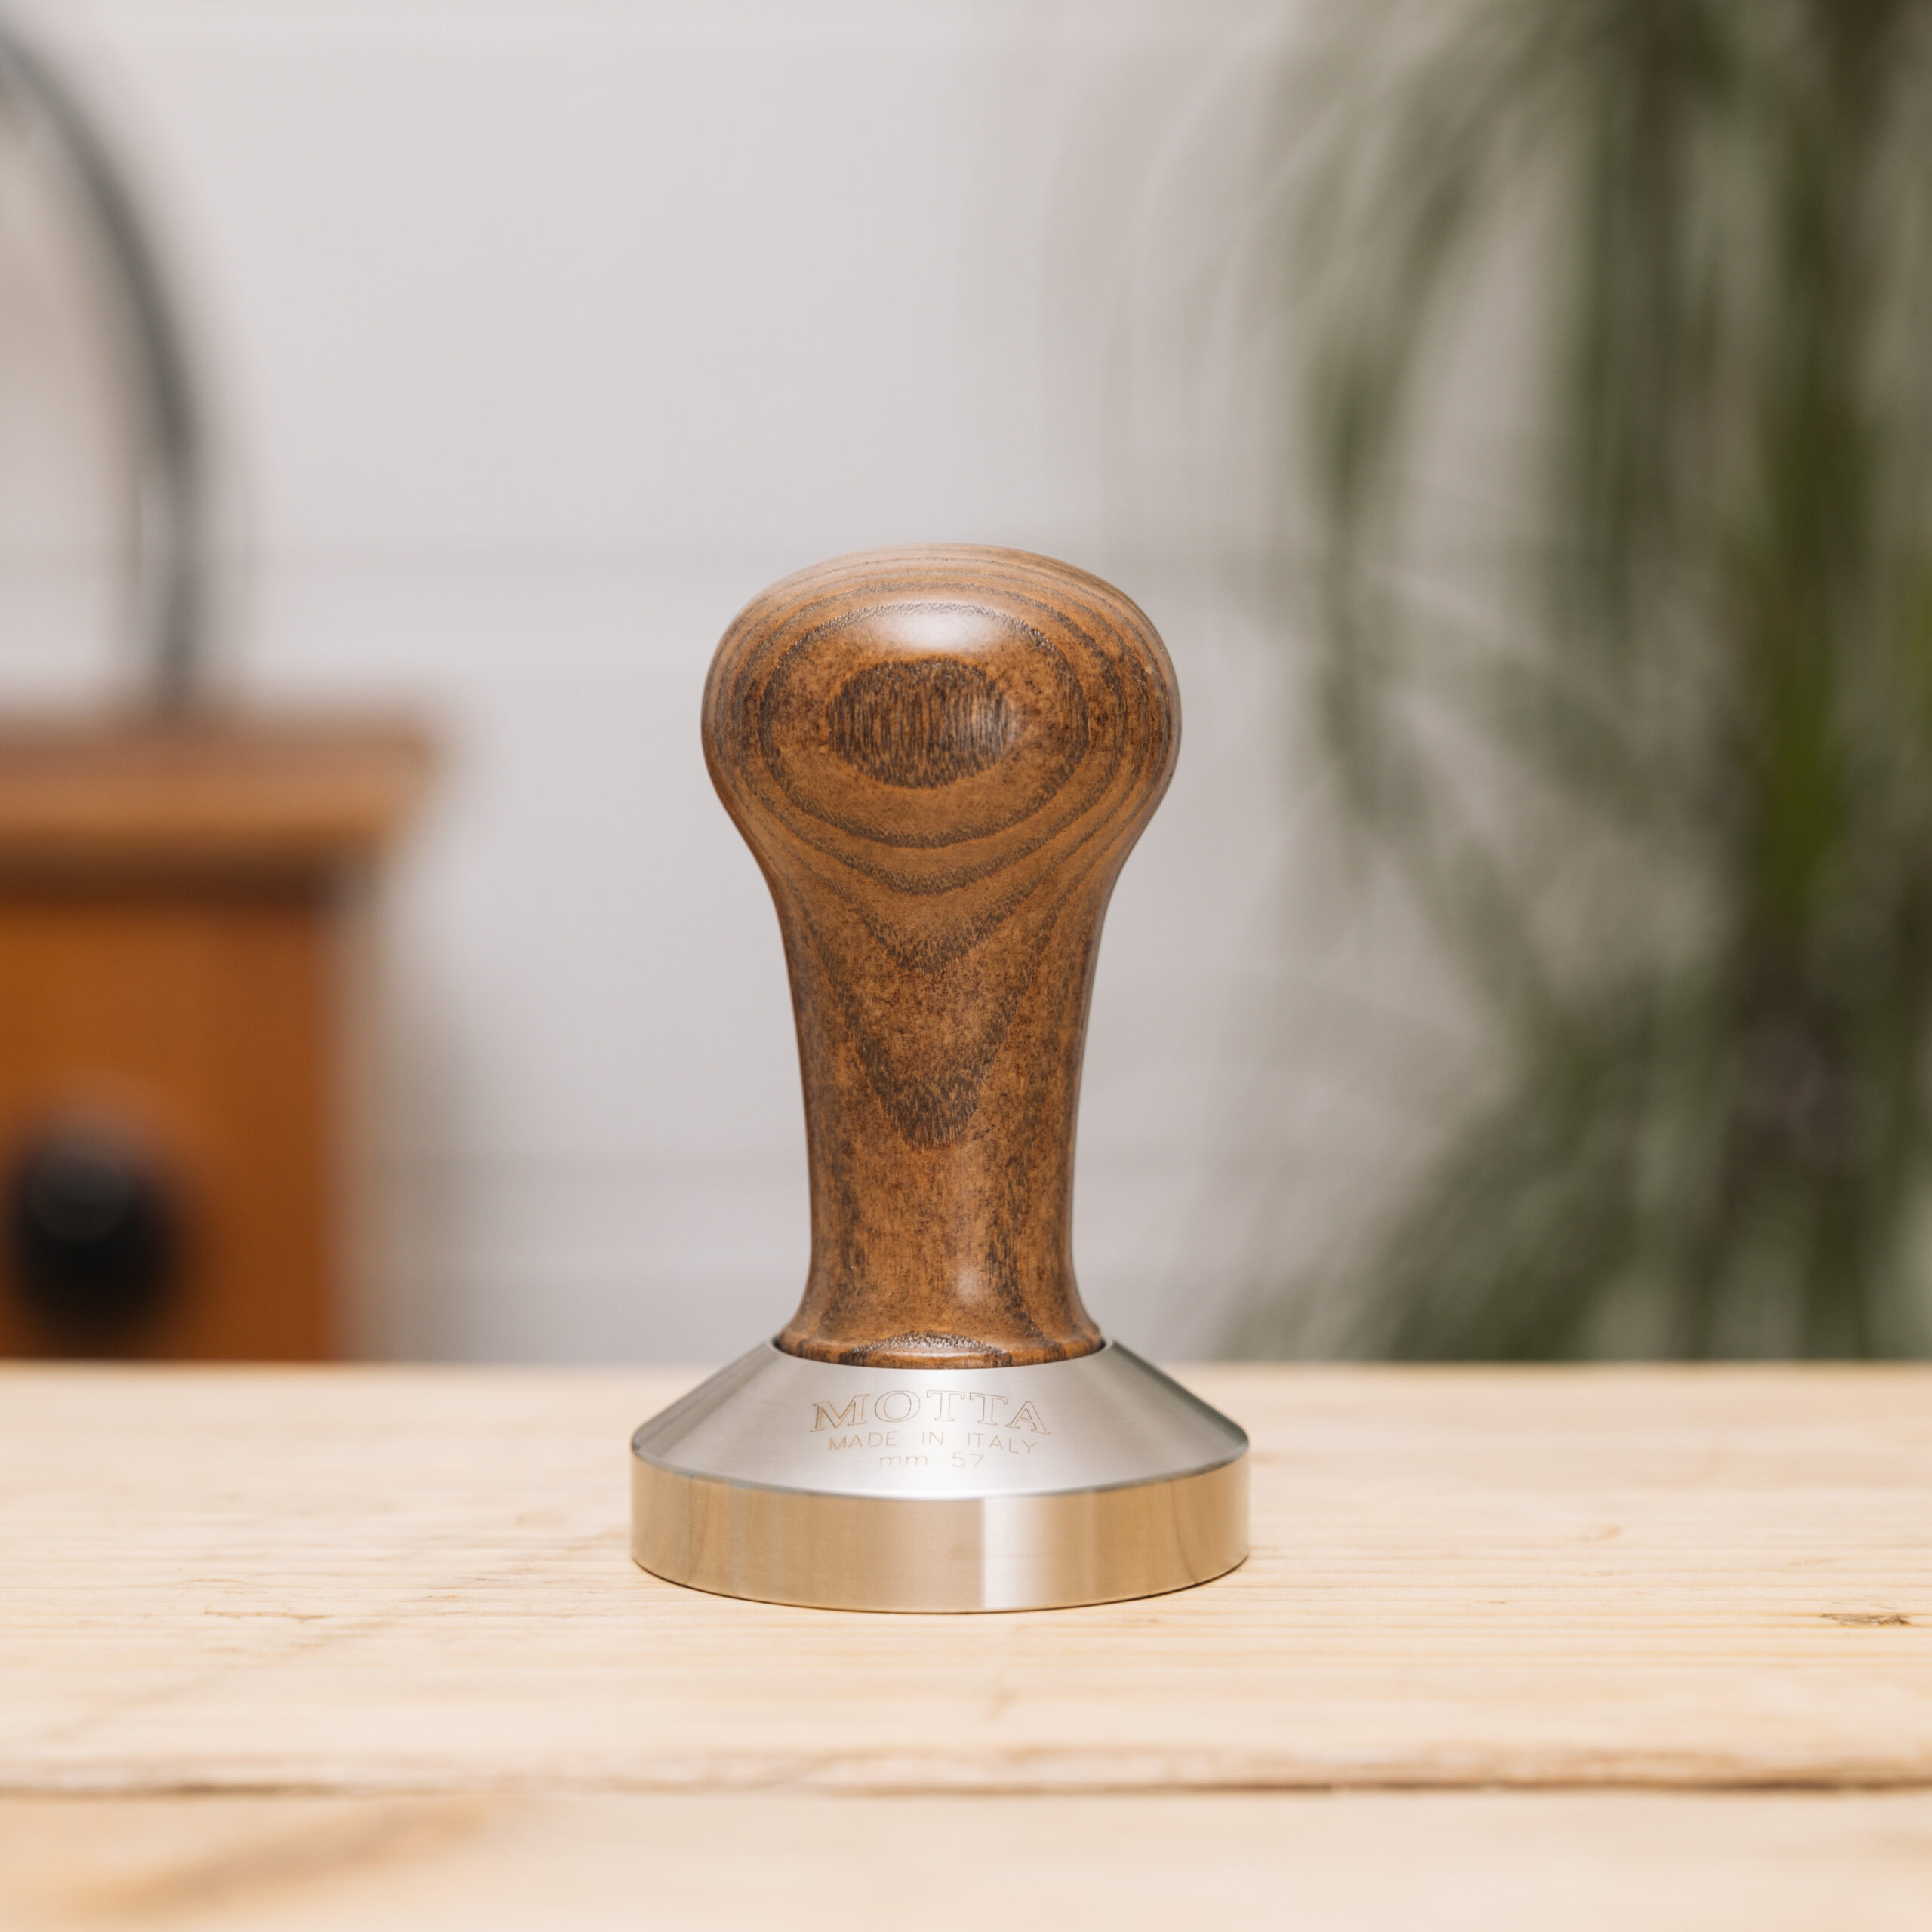 Tampers